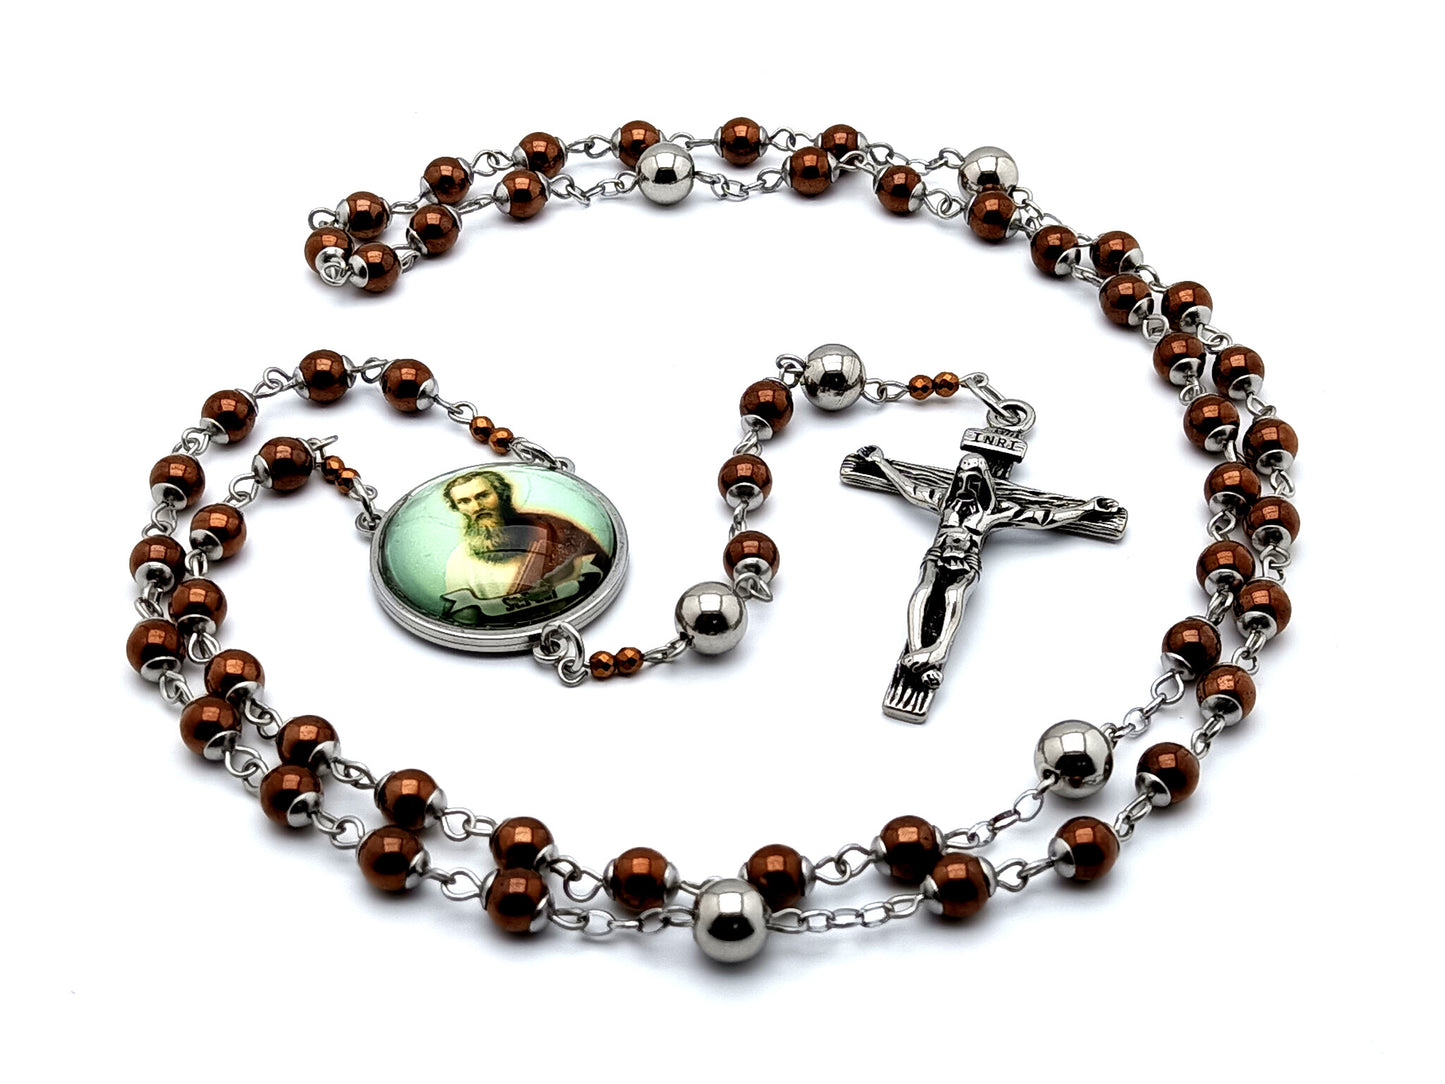 Saint Paul the Apostle bronze electroplated hematite gemstone rosary beads with stainless steel crucifix and Our Father beads.